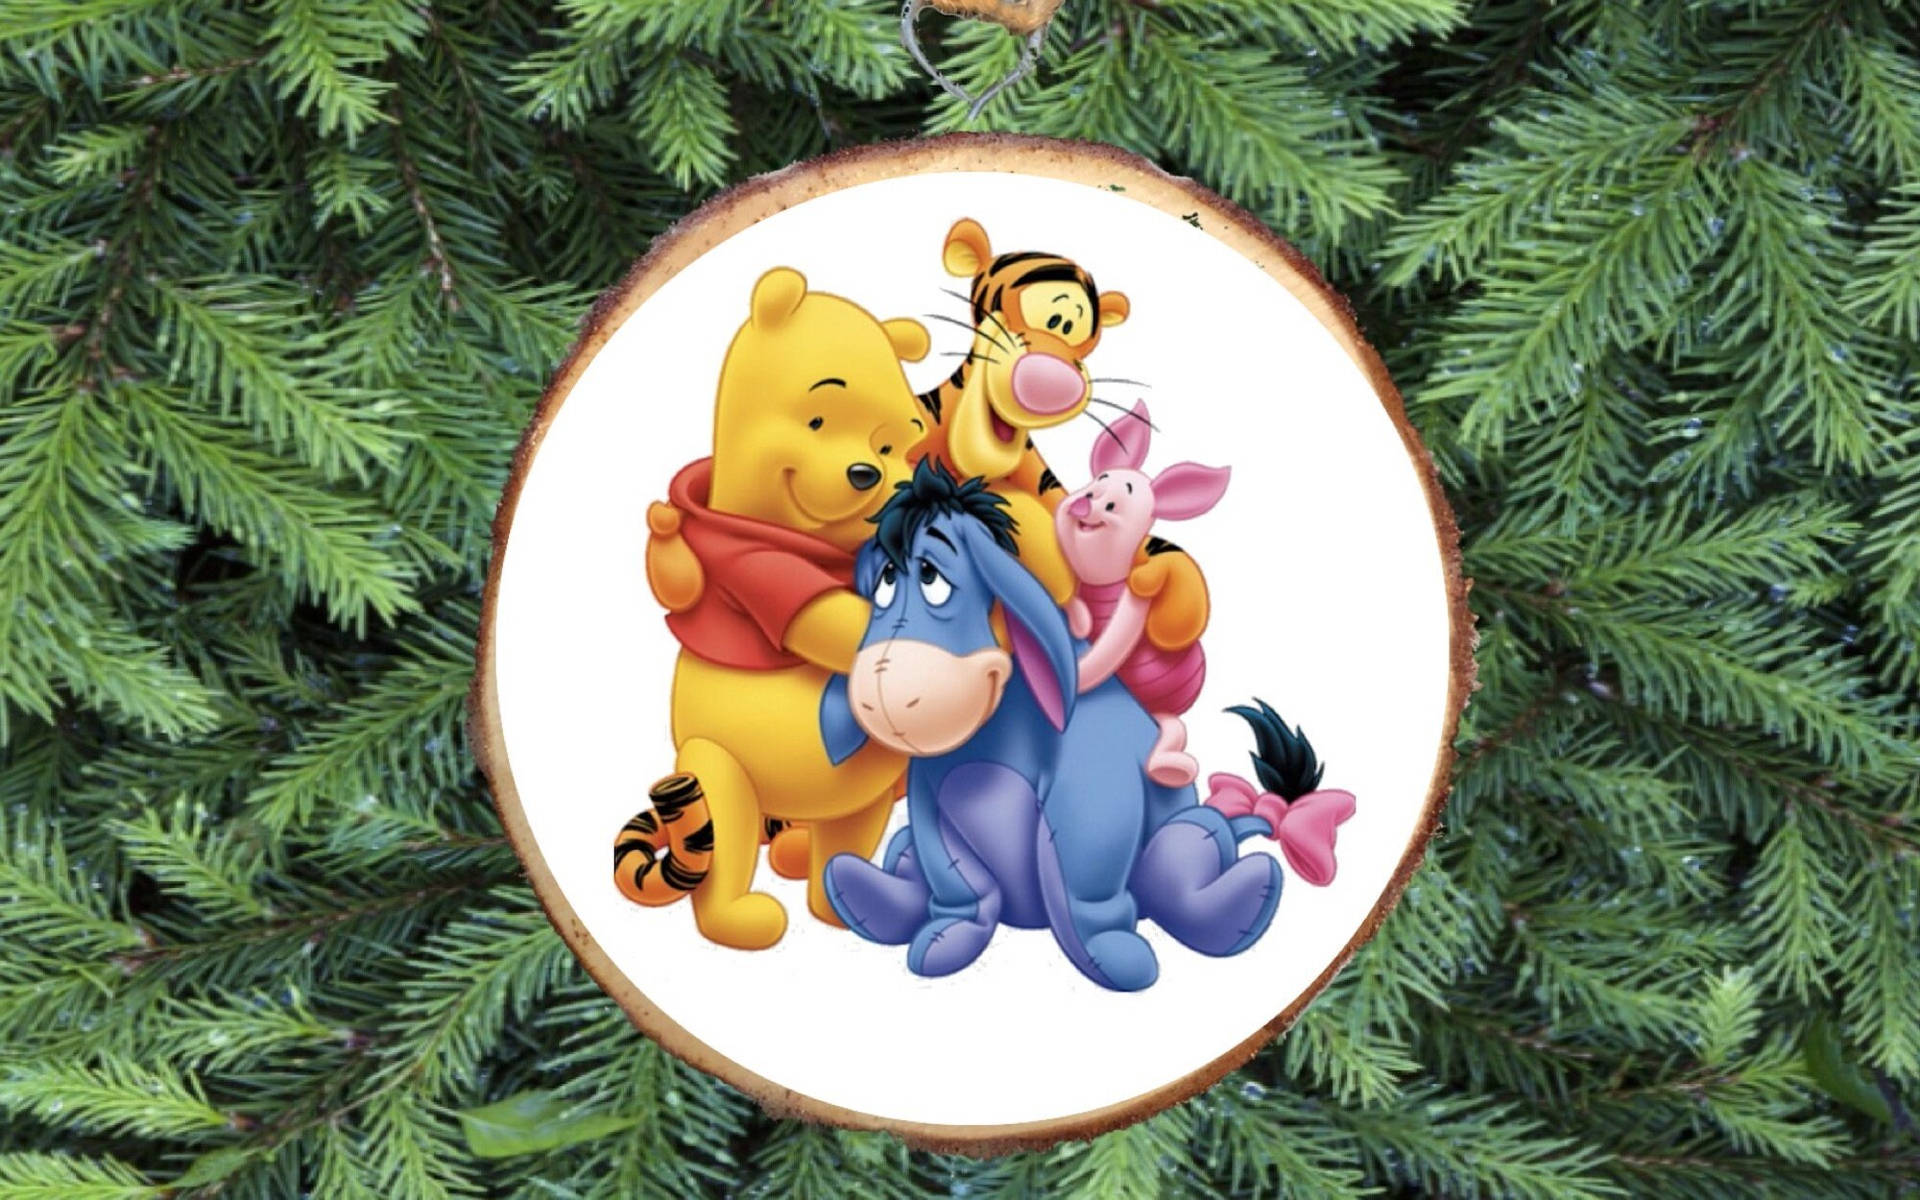 Spread holiday cheer and enjoy Christmas with Winnie The Pooh and the gang! Wallpaper